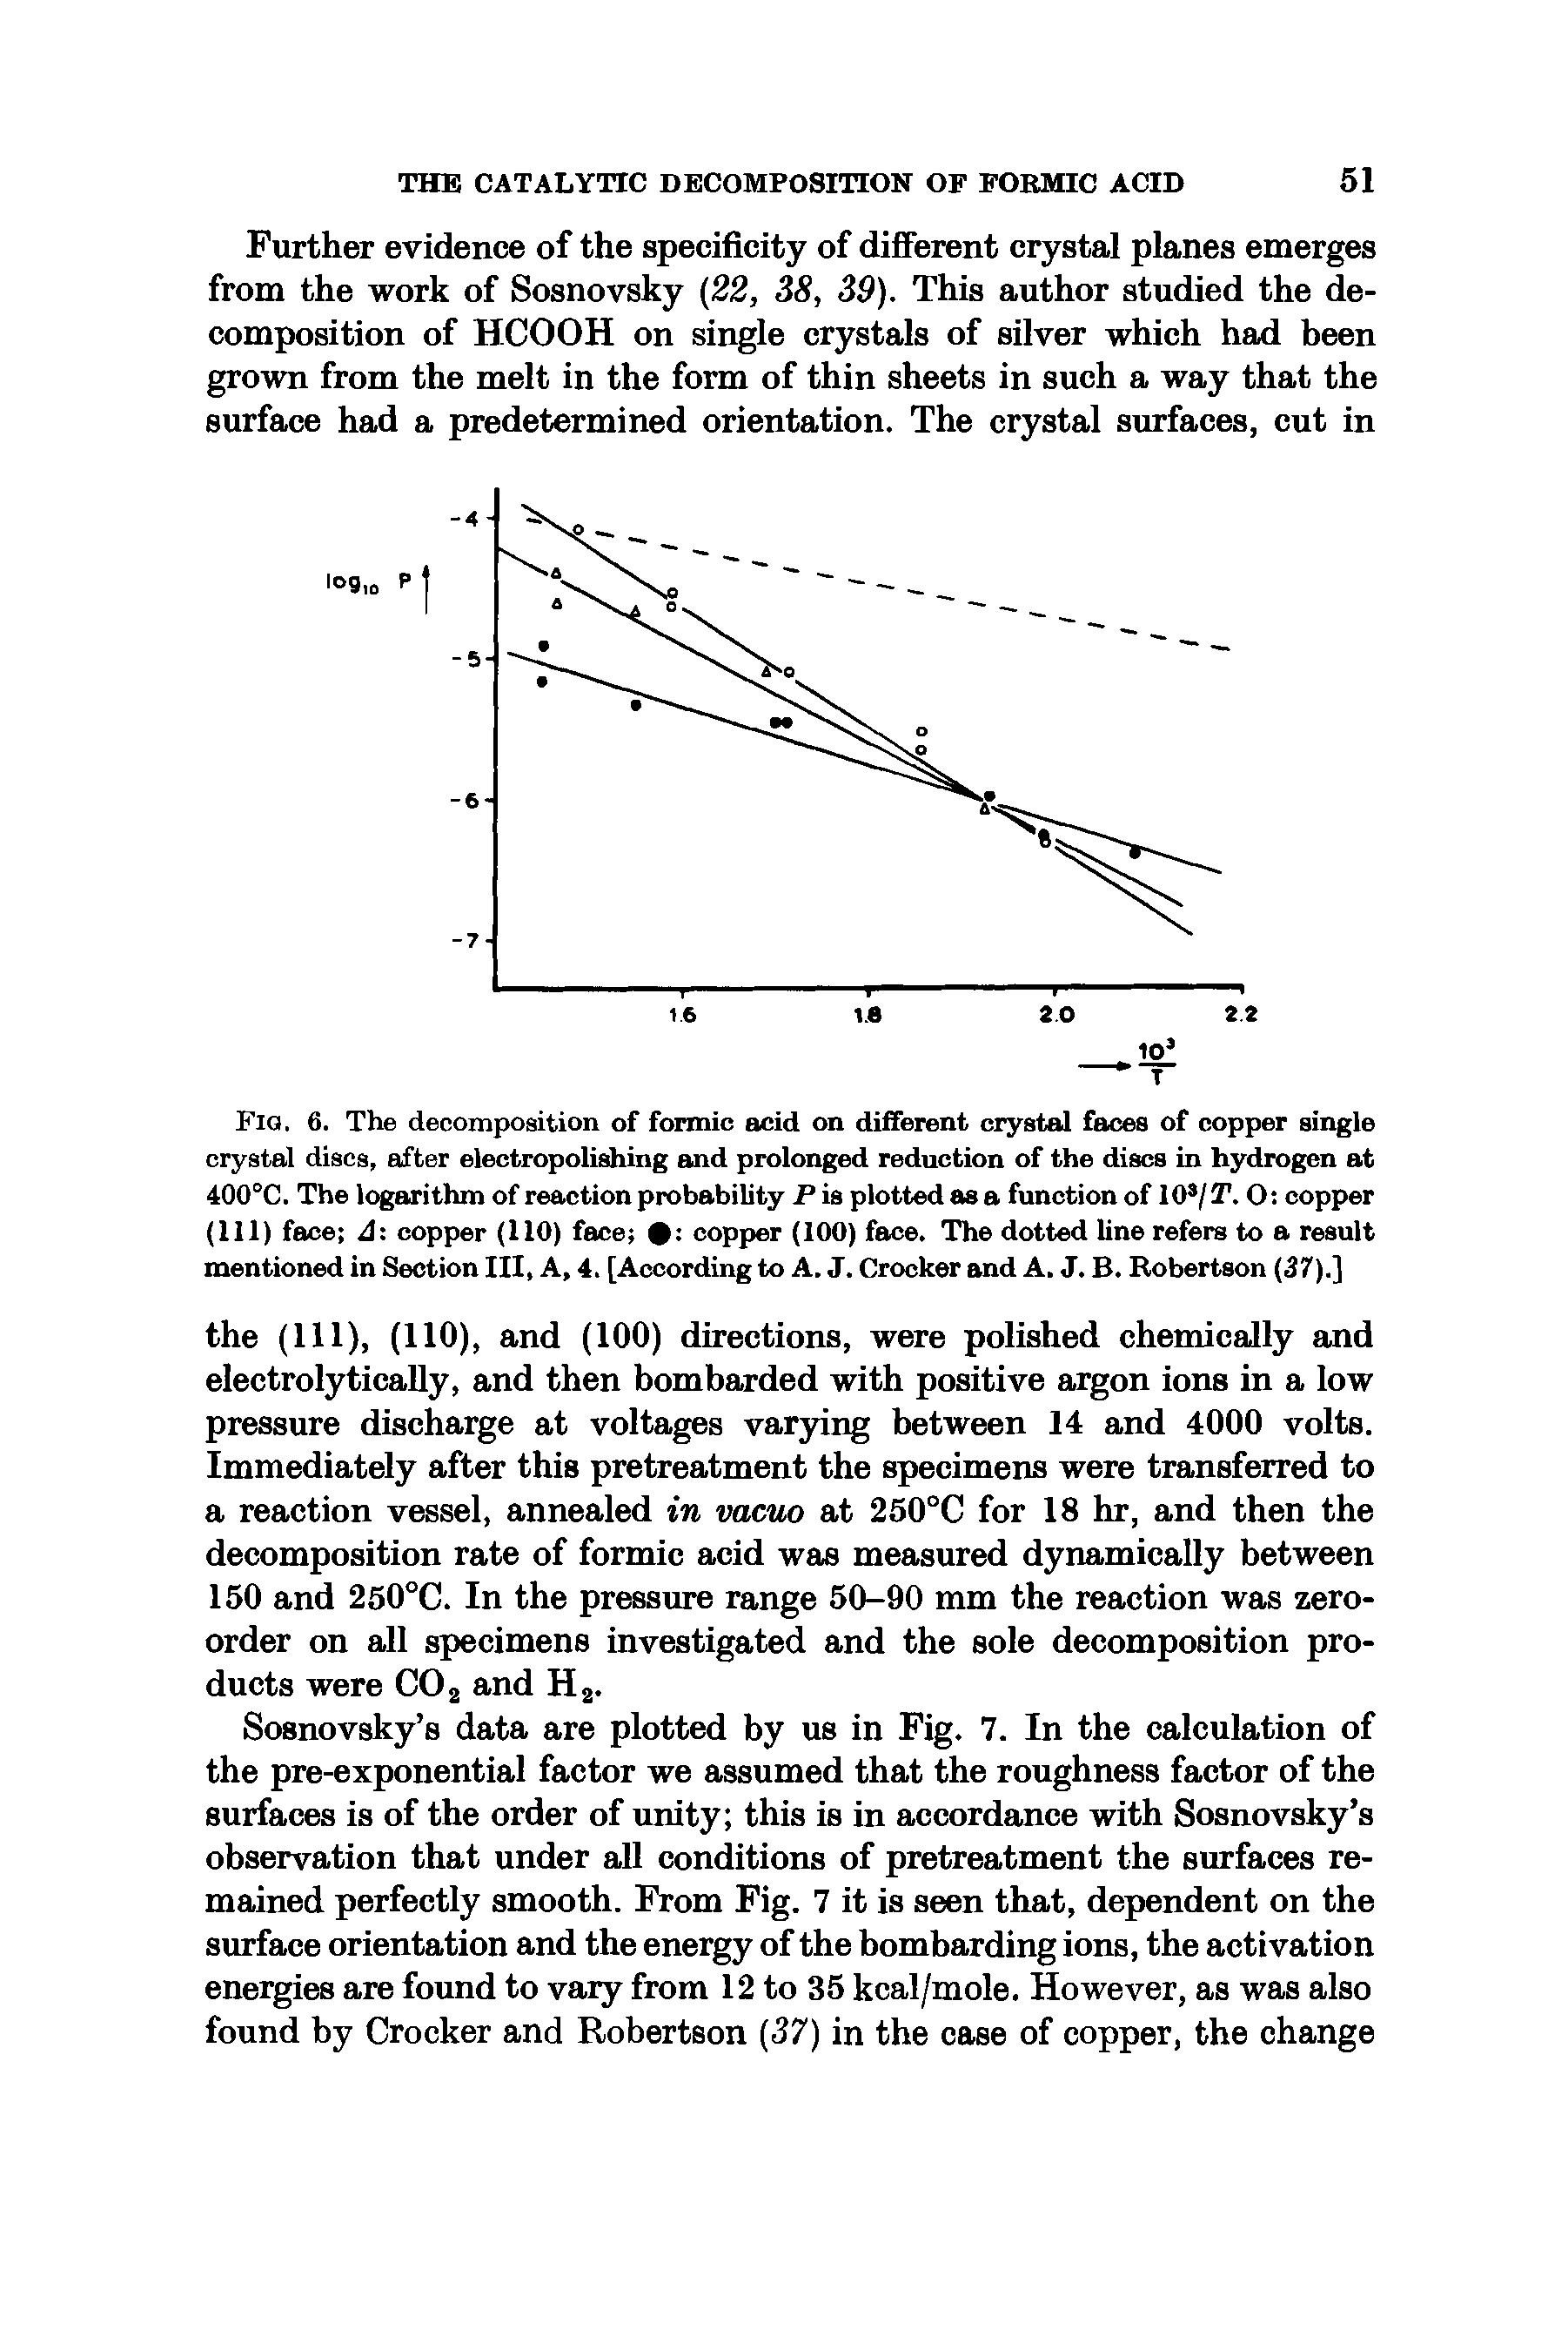 Fig. 6. The decomposition of formic acid on different crystal faces of copper single crystal discs, after electropolishing and prolonged reduction of the discs in hydrogen at 400°C. The logarithm of reaction probability P is plotted as a function of 10s/T. O copper (111) face A-. copper (110) face copper (100) face. The dotted line refers to a result mentioned in Section III, A, 4. [According to A. J. Crocker and A. J. B. Robertson (37).]...